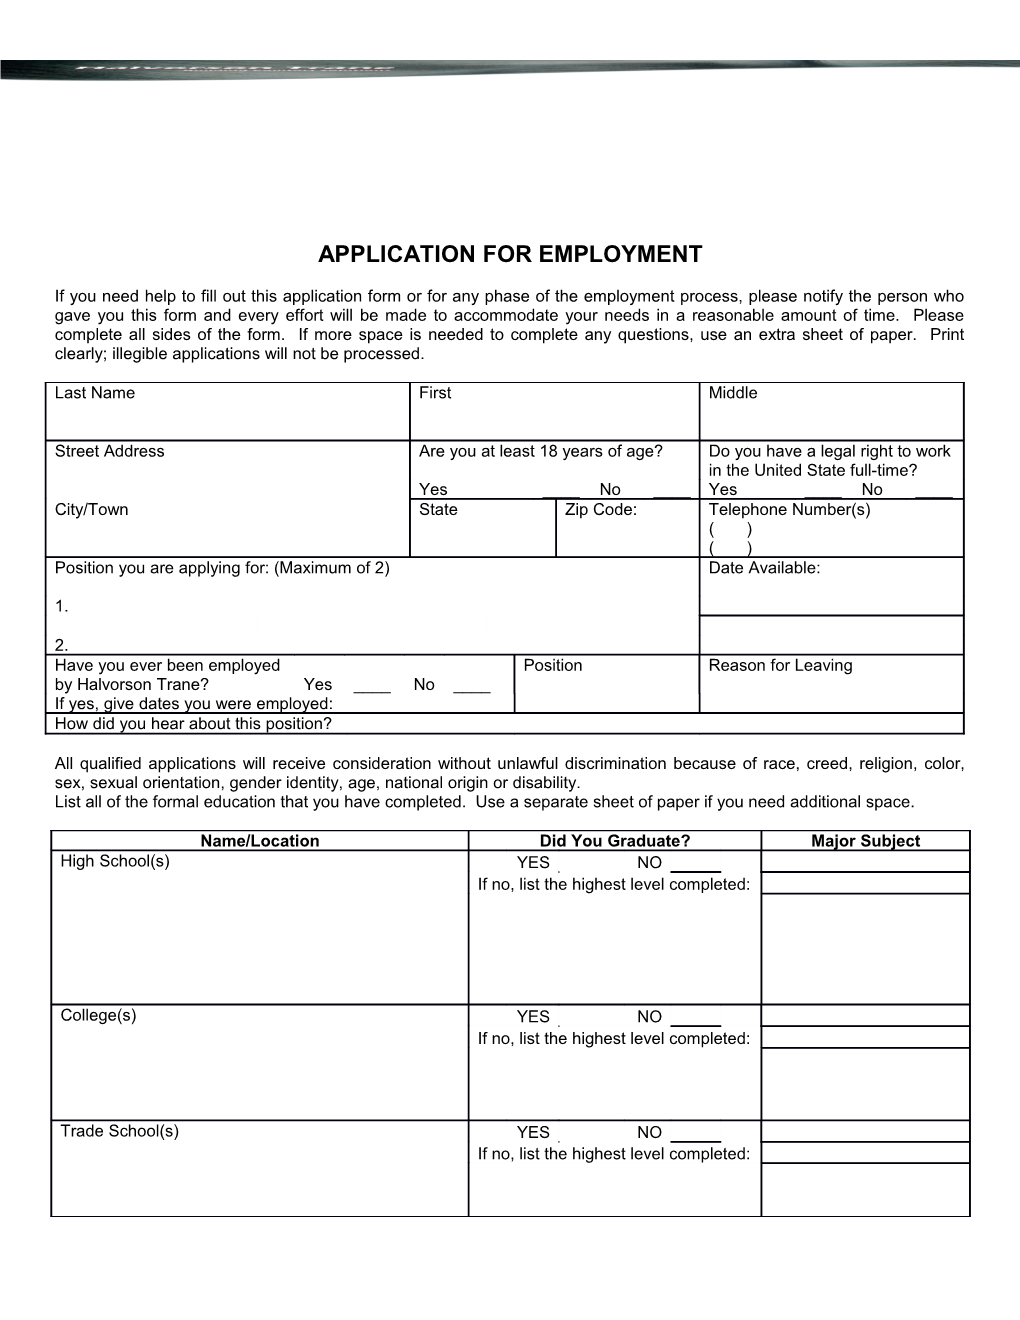 Application for Employment s27